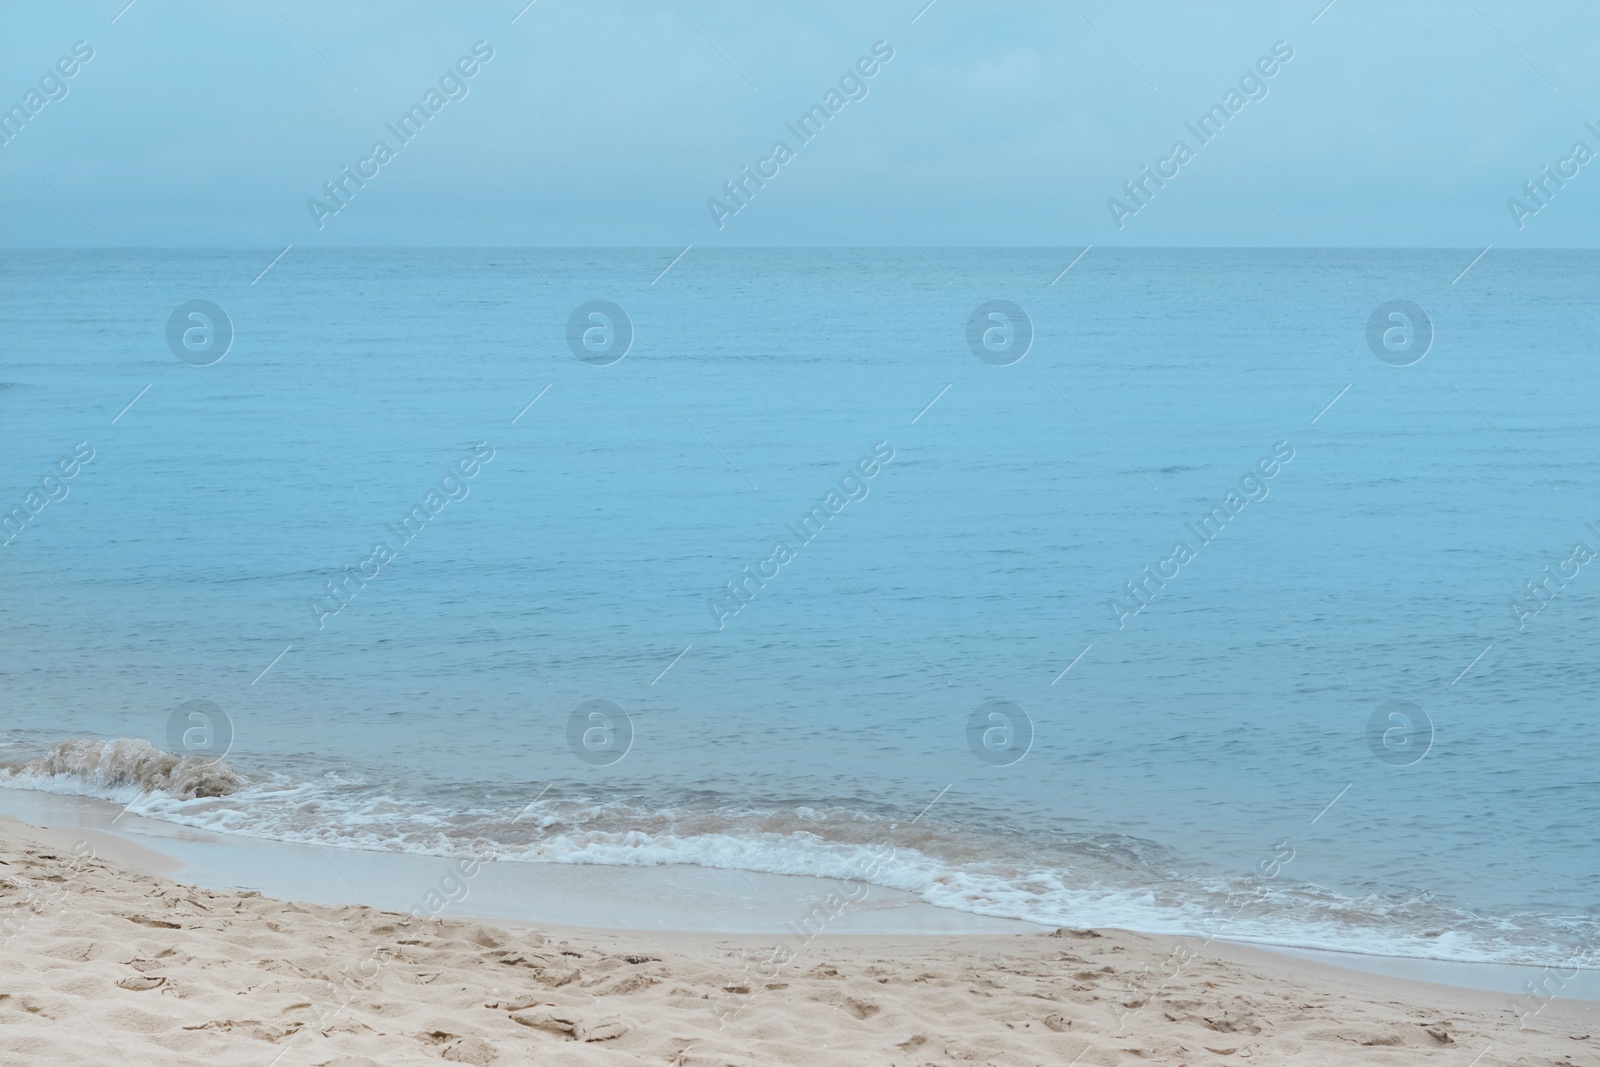 Photo of Picturesque view of beautiful sea waves on sandy beach